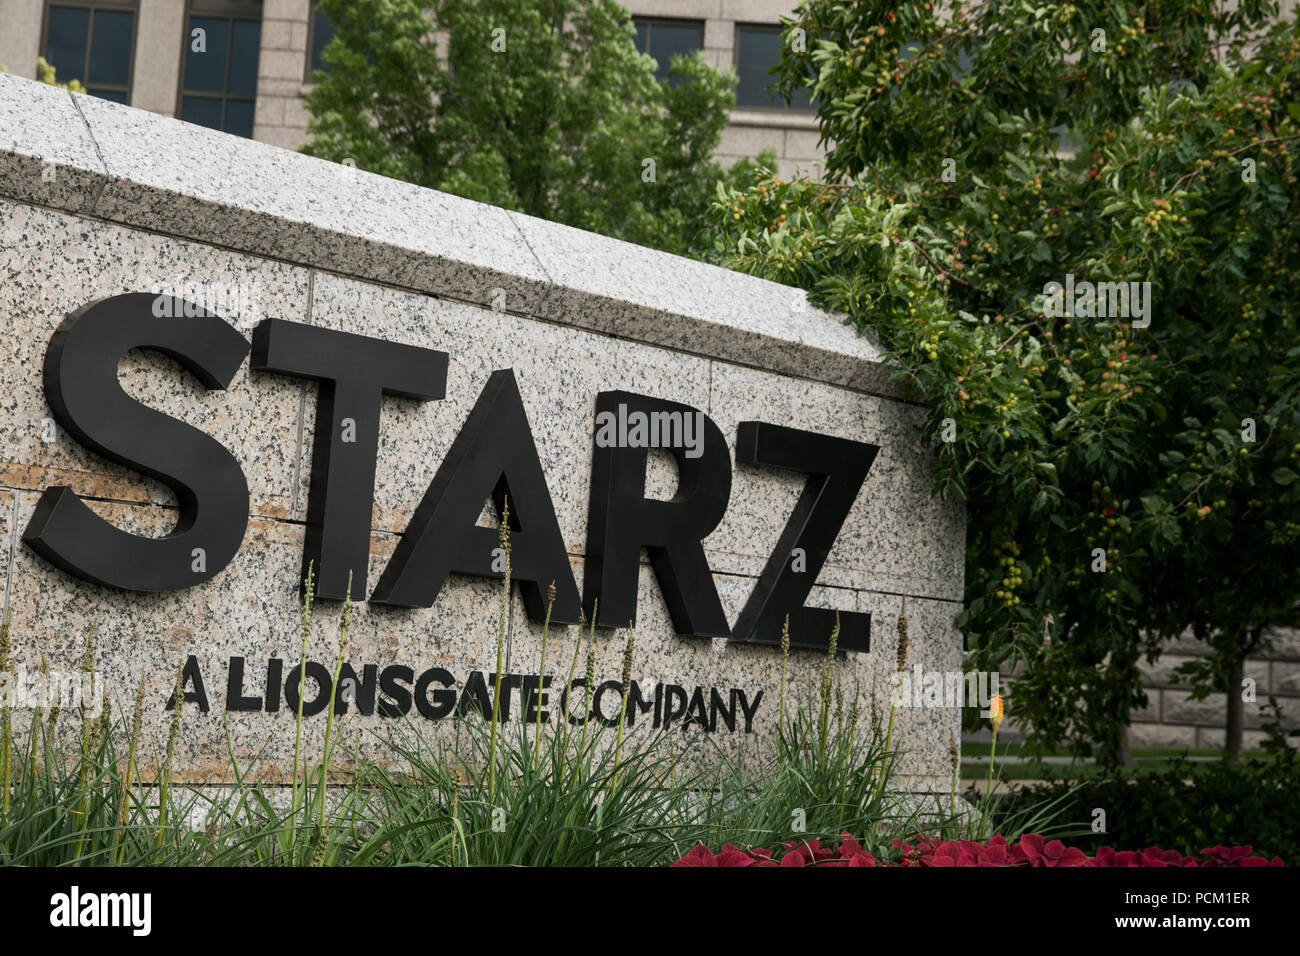 A logo sign outside of the headquarters of cable television network Starz in Englewood, Colorado, on July 22, 2018. Stock Photo